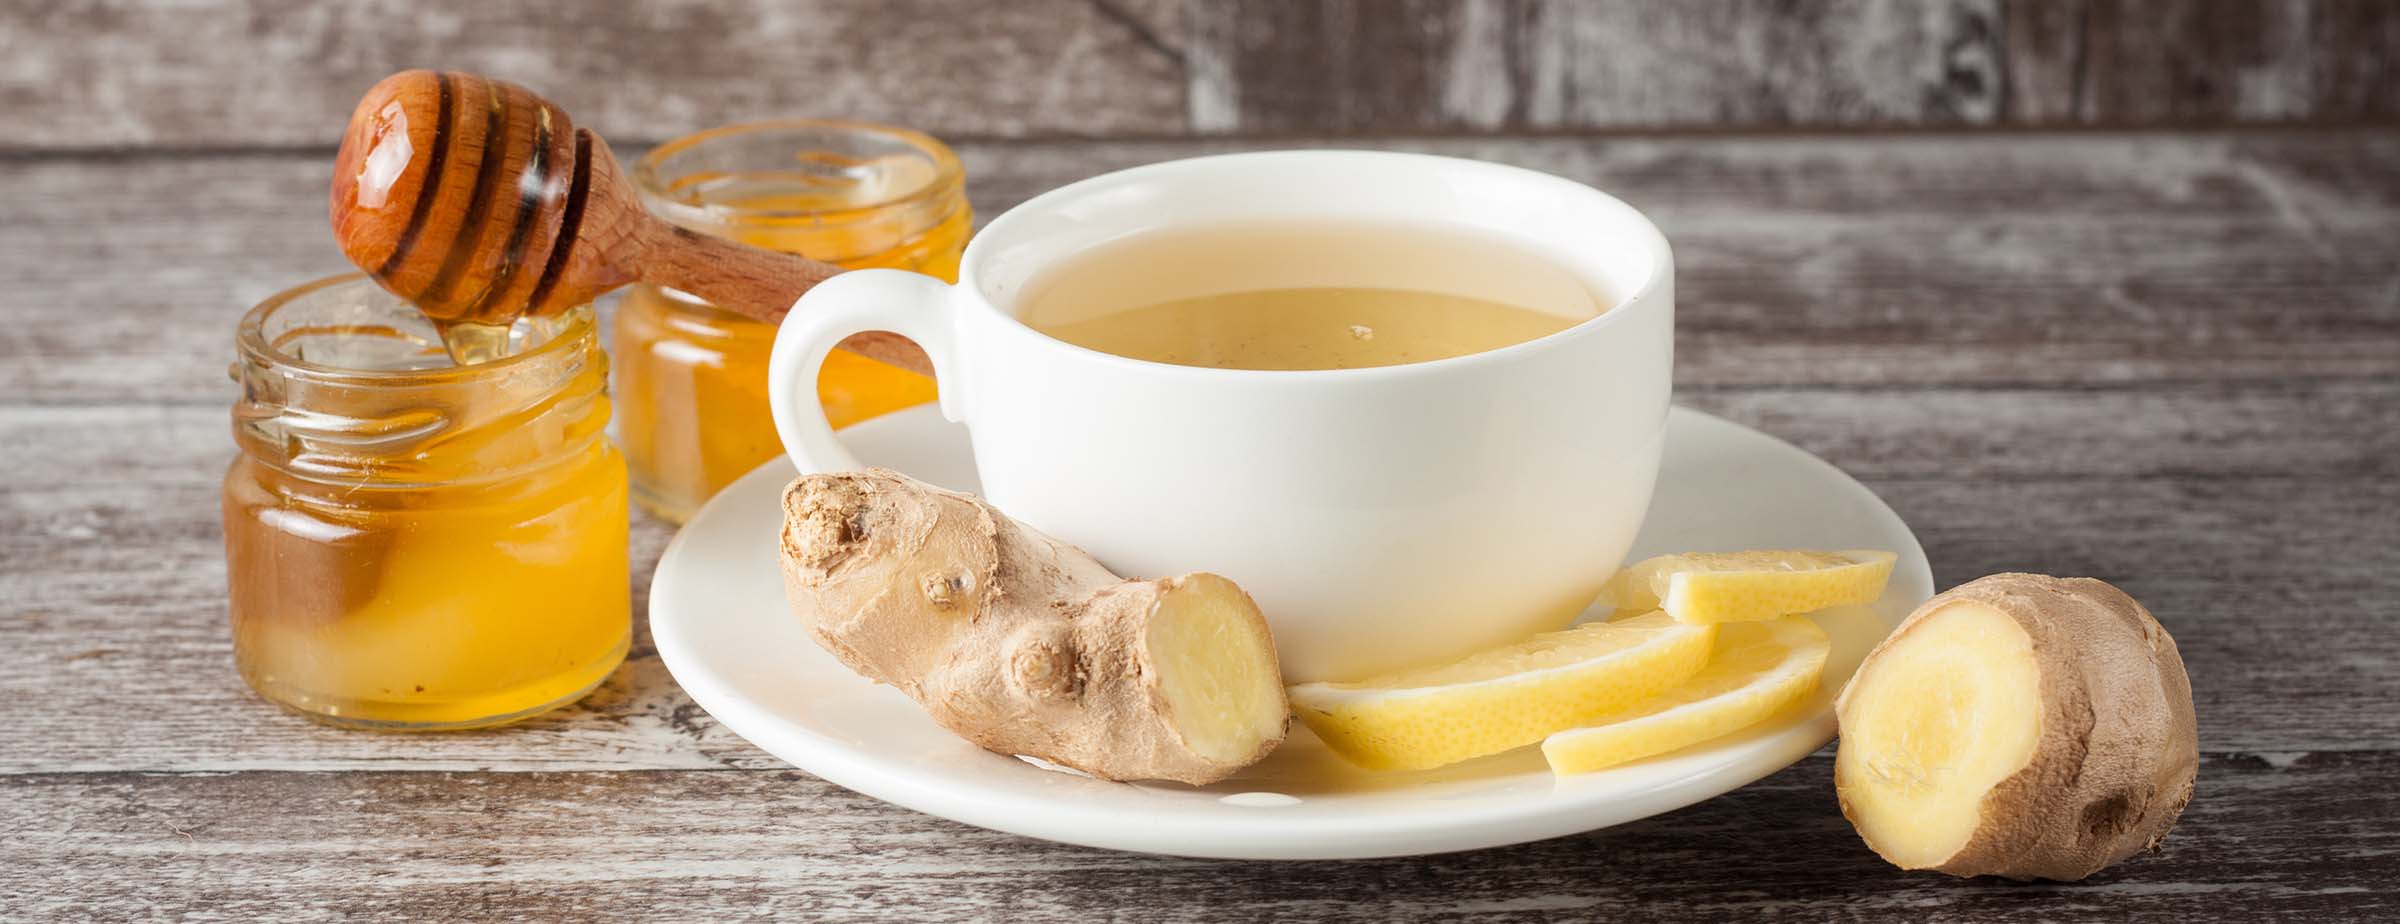 How to Eat Ginger for Health Benefits